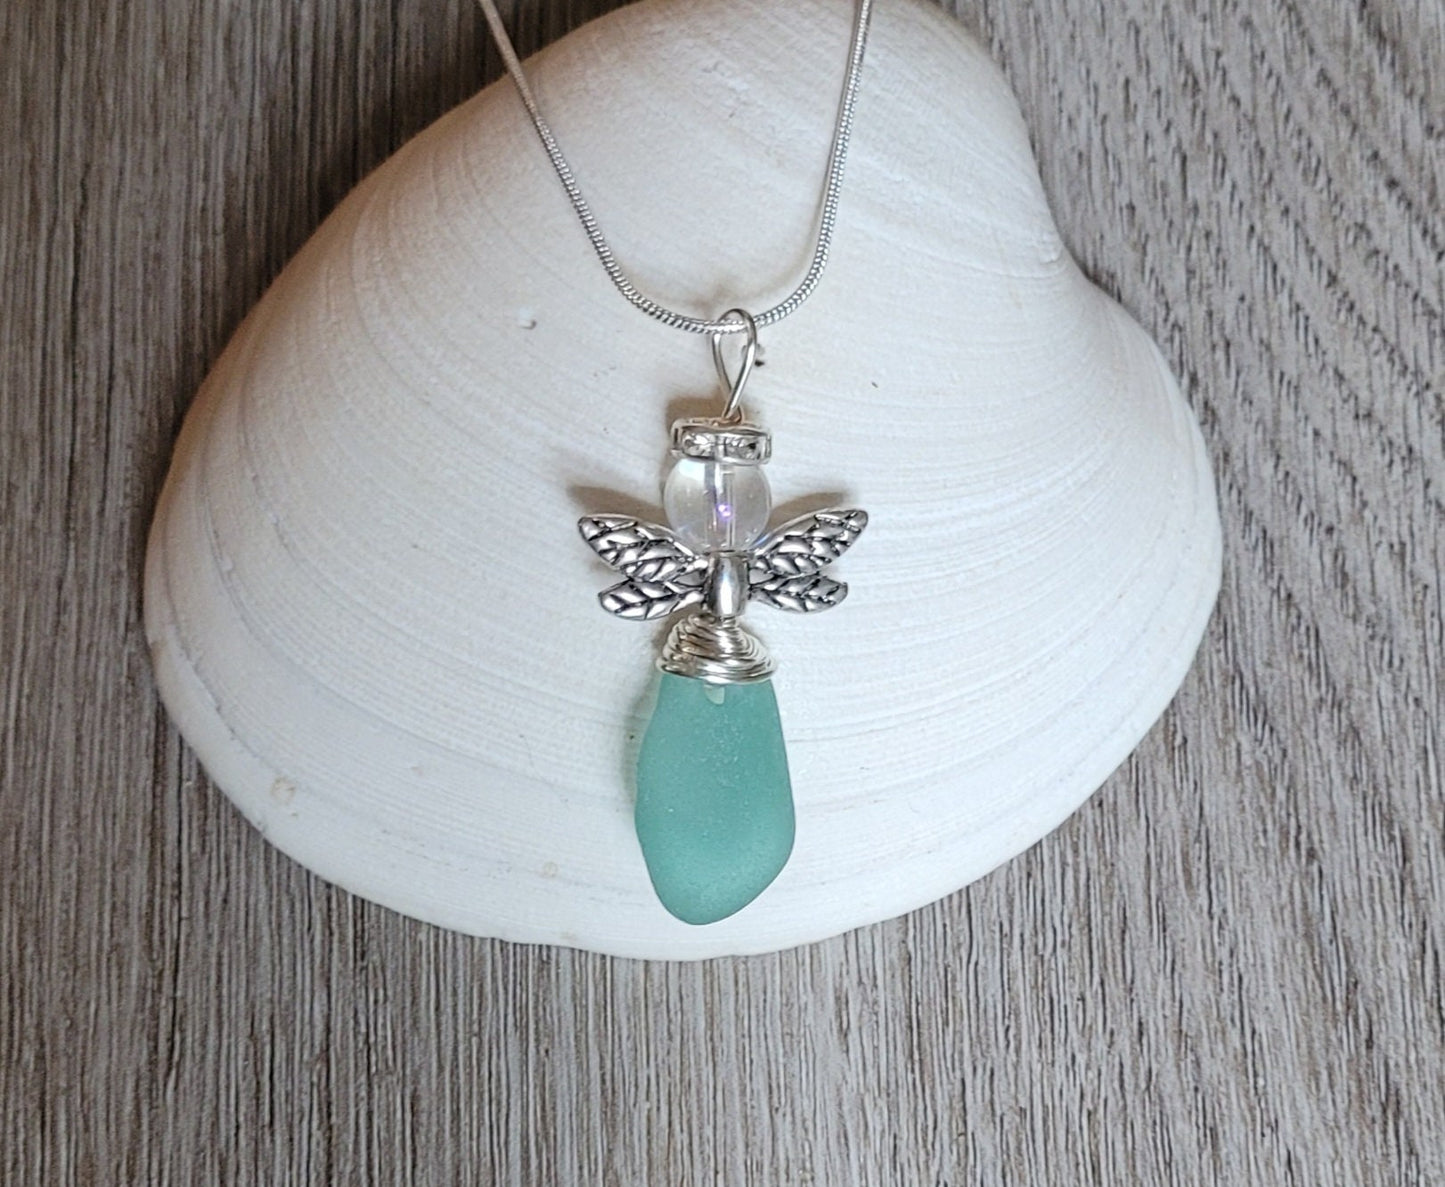 Sea Glass Fairy Necklace/Genuine aqua sea glass/Beach Glass fairy Pendant/Fairy Sun Catcher/Get Well Gift/Gift for a Friend/Gift for Her/105